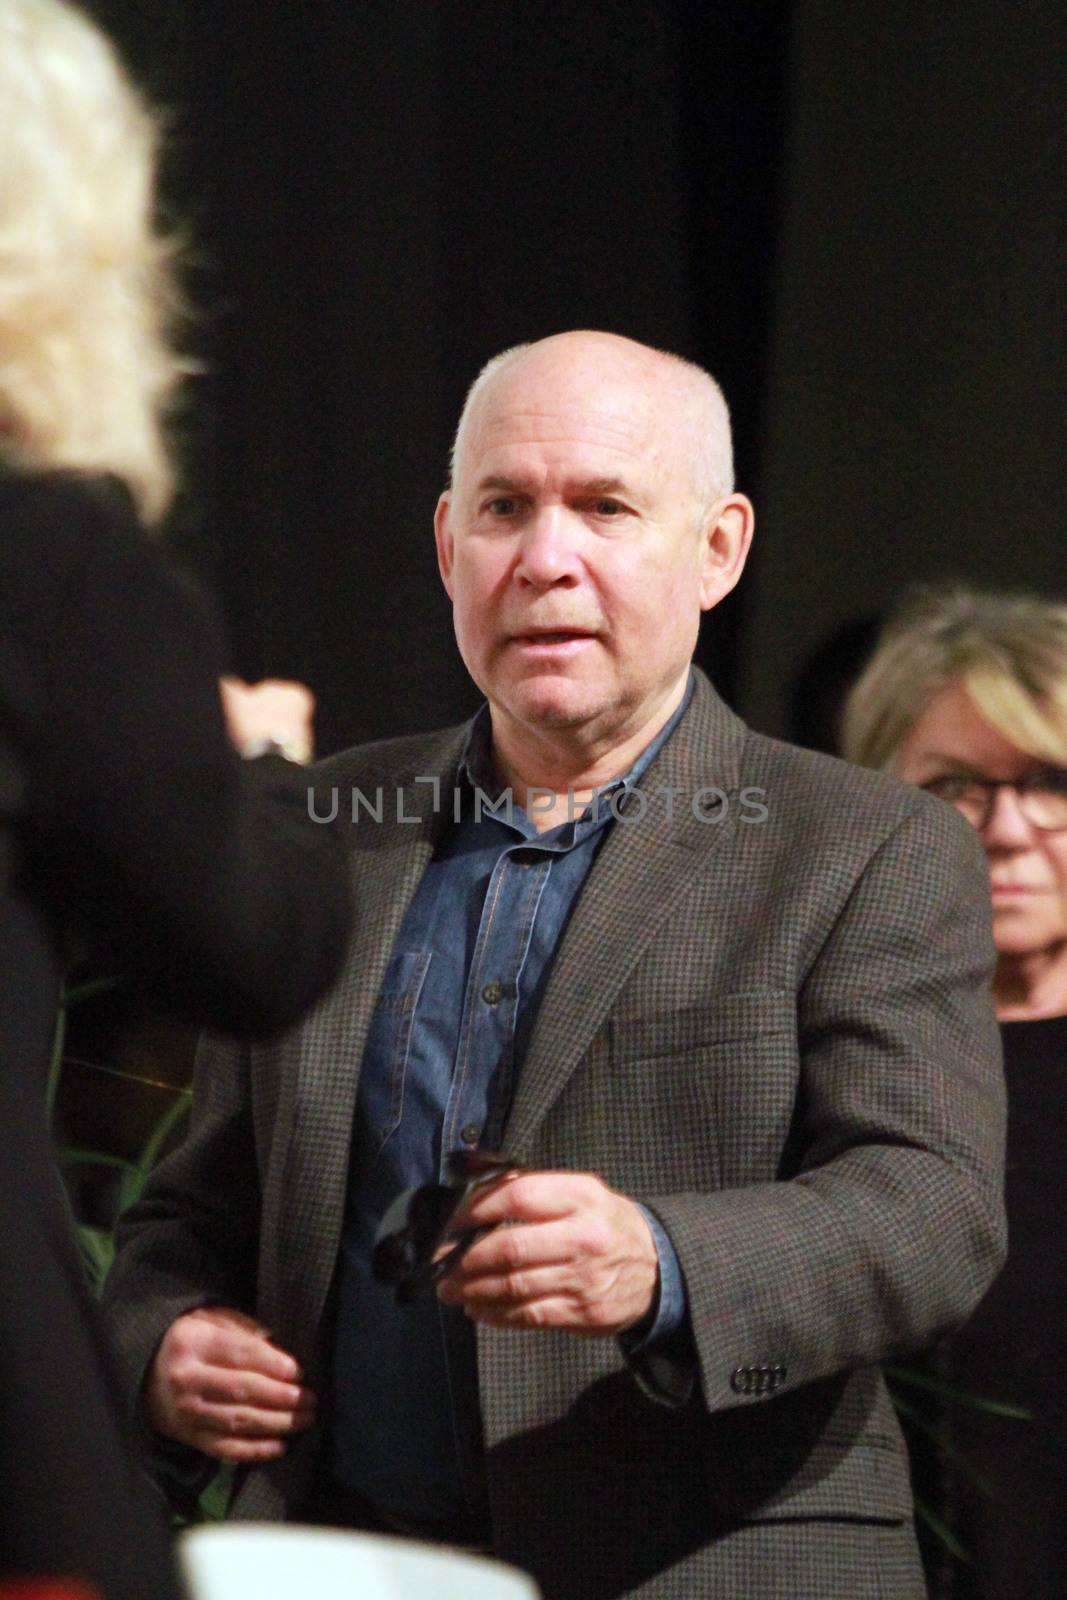 ITALY, Spilimbergo: Famous US photographer and photojournalist Steve McCurry attends the 'International Award of Photography' ceremony, at the Miotto Theatre, in Spilimbergo, northern Italy, on February 27, 2016.